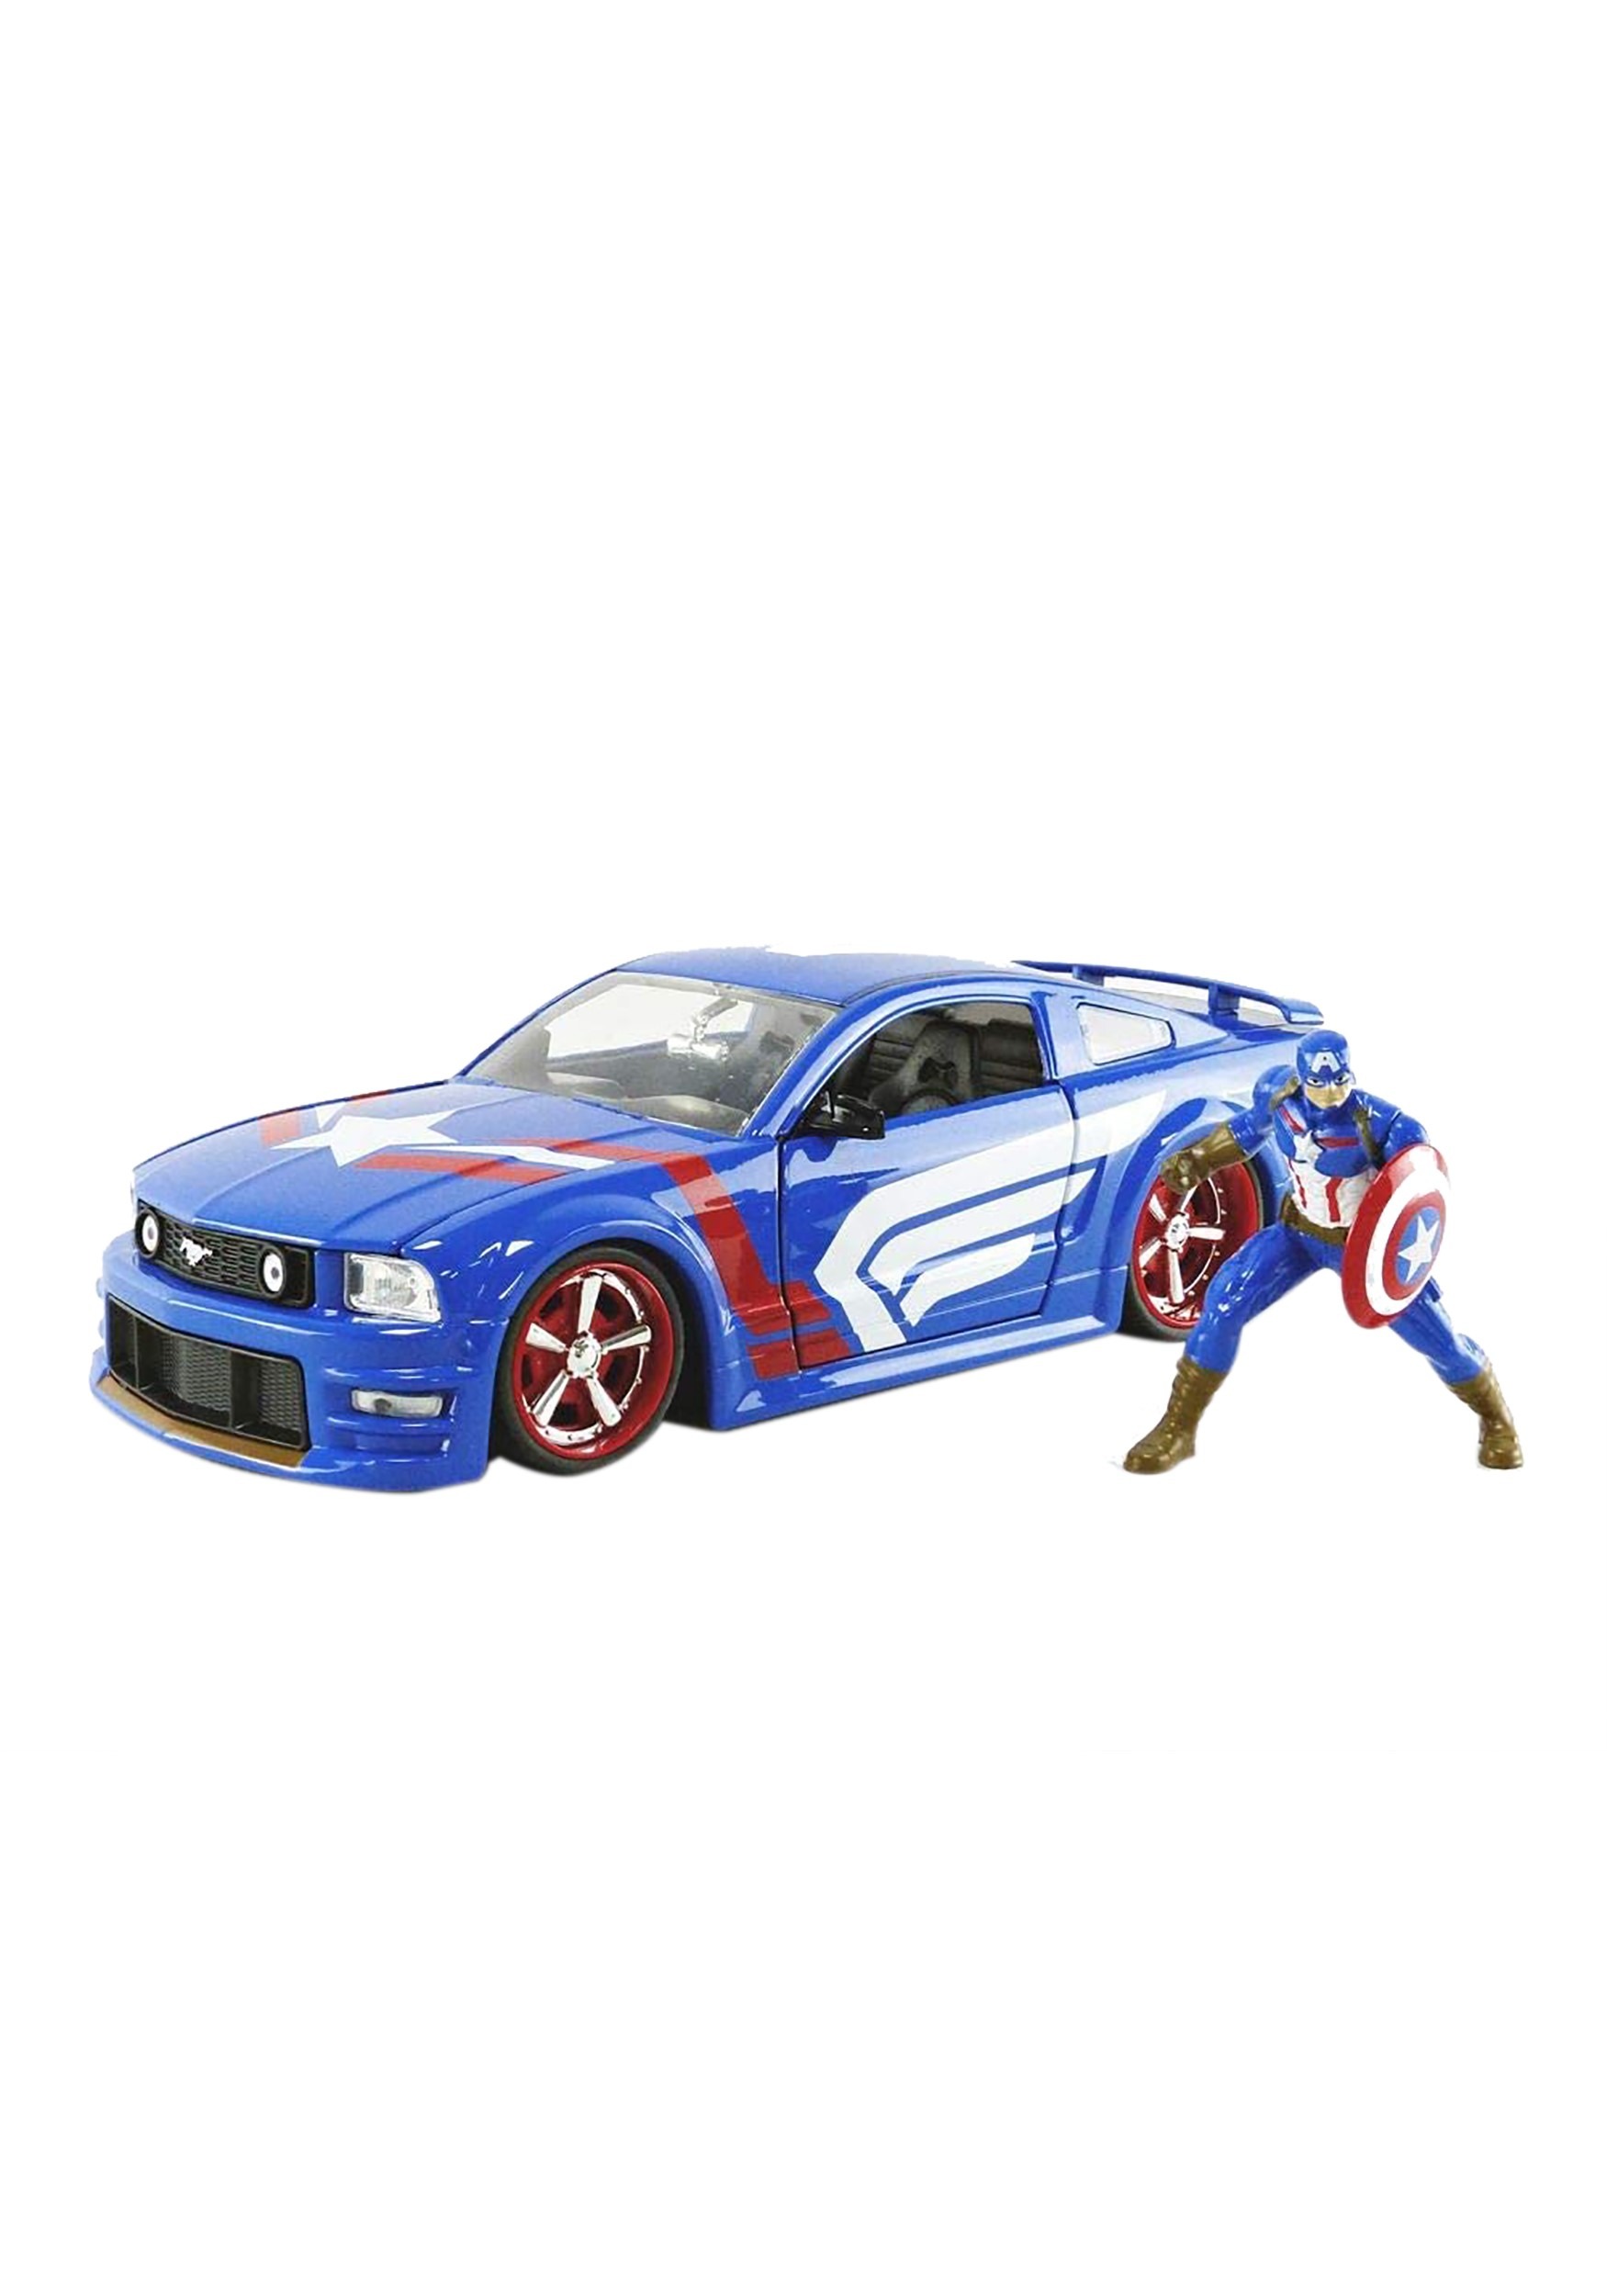 1:24 Scale 2006 Ford Mustang GT w/ Captain America